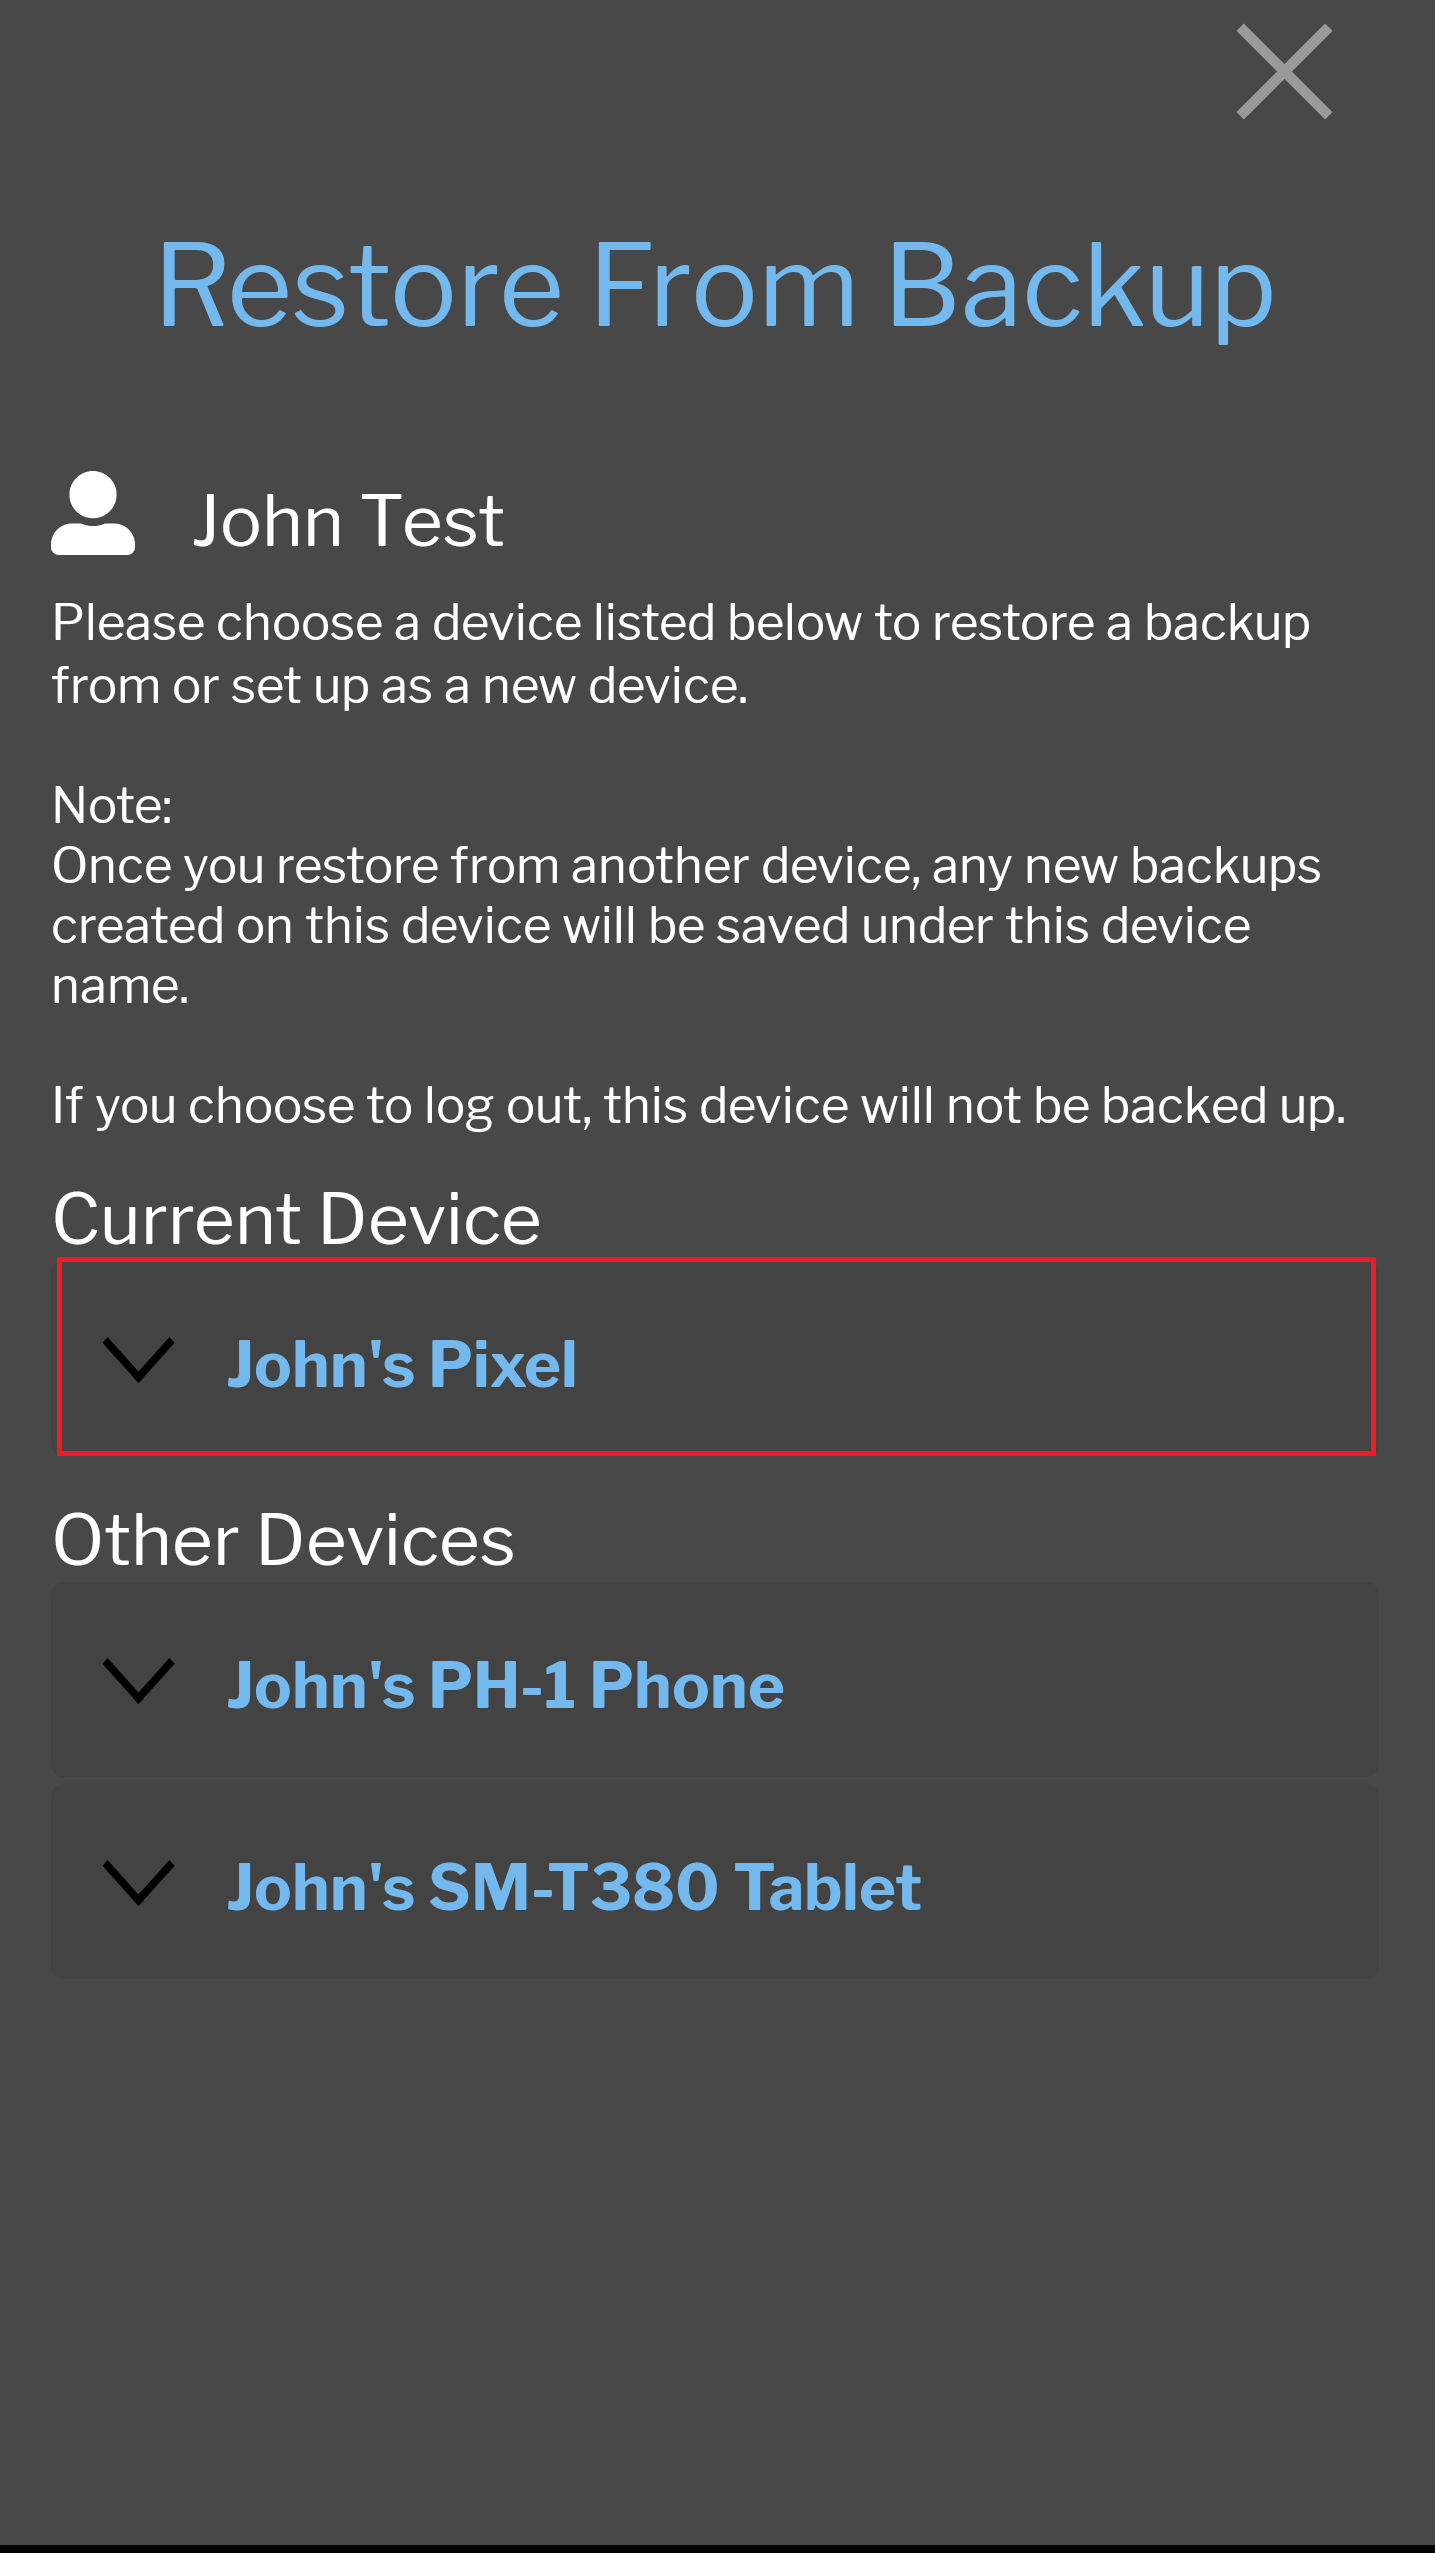 Restore From Backup Device List